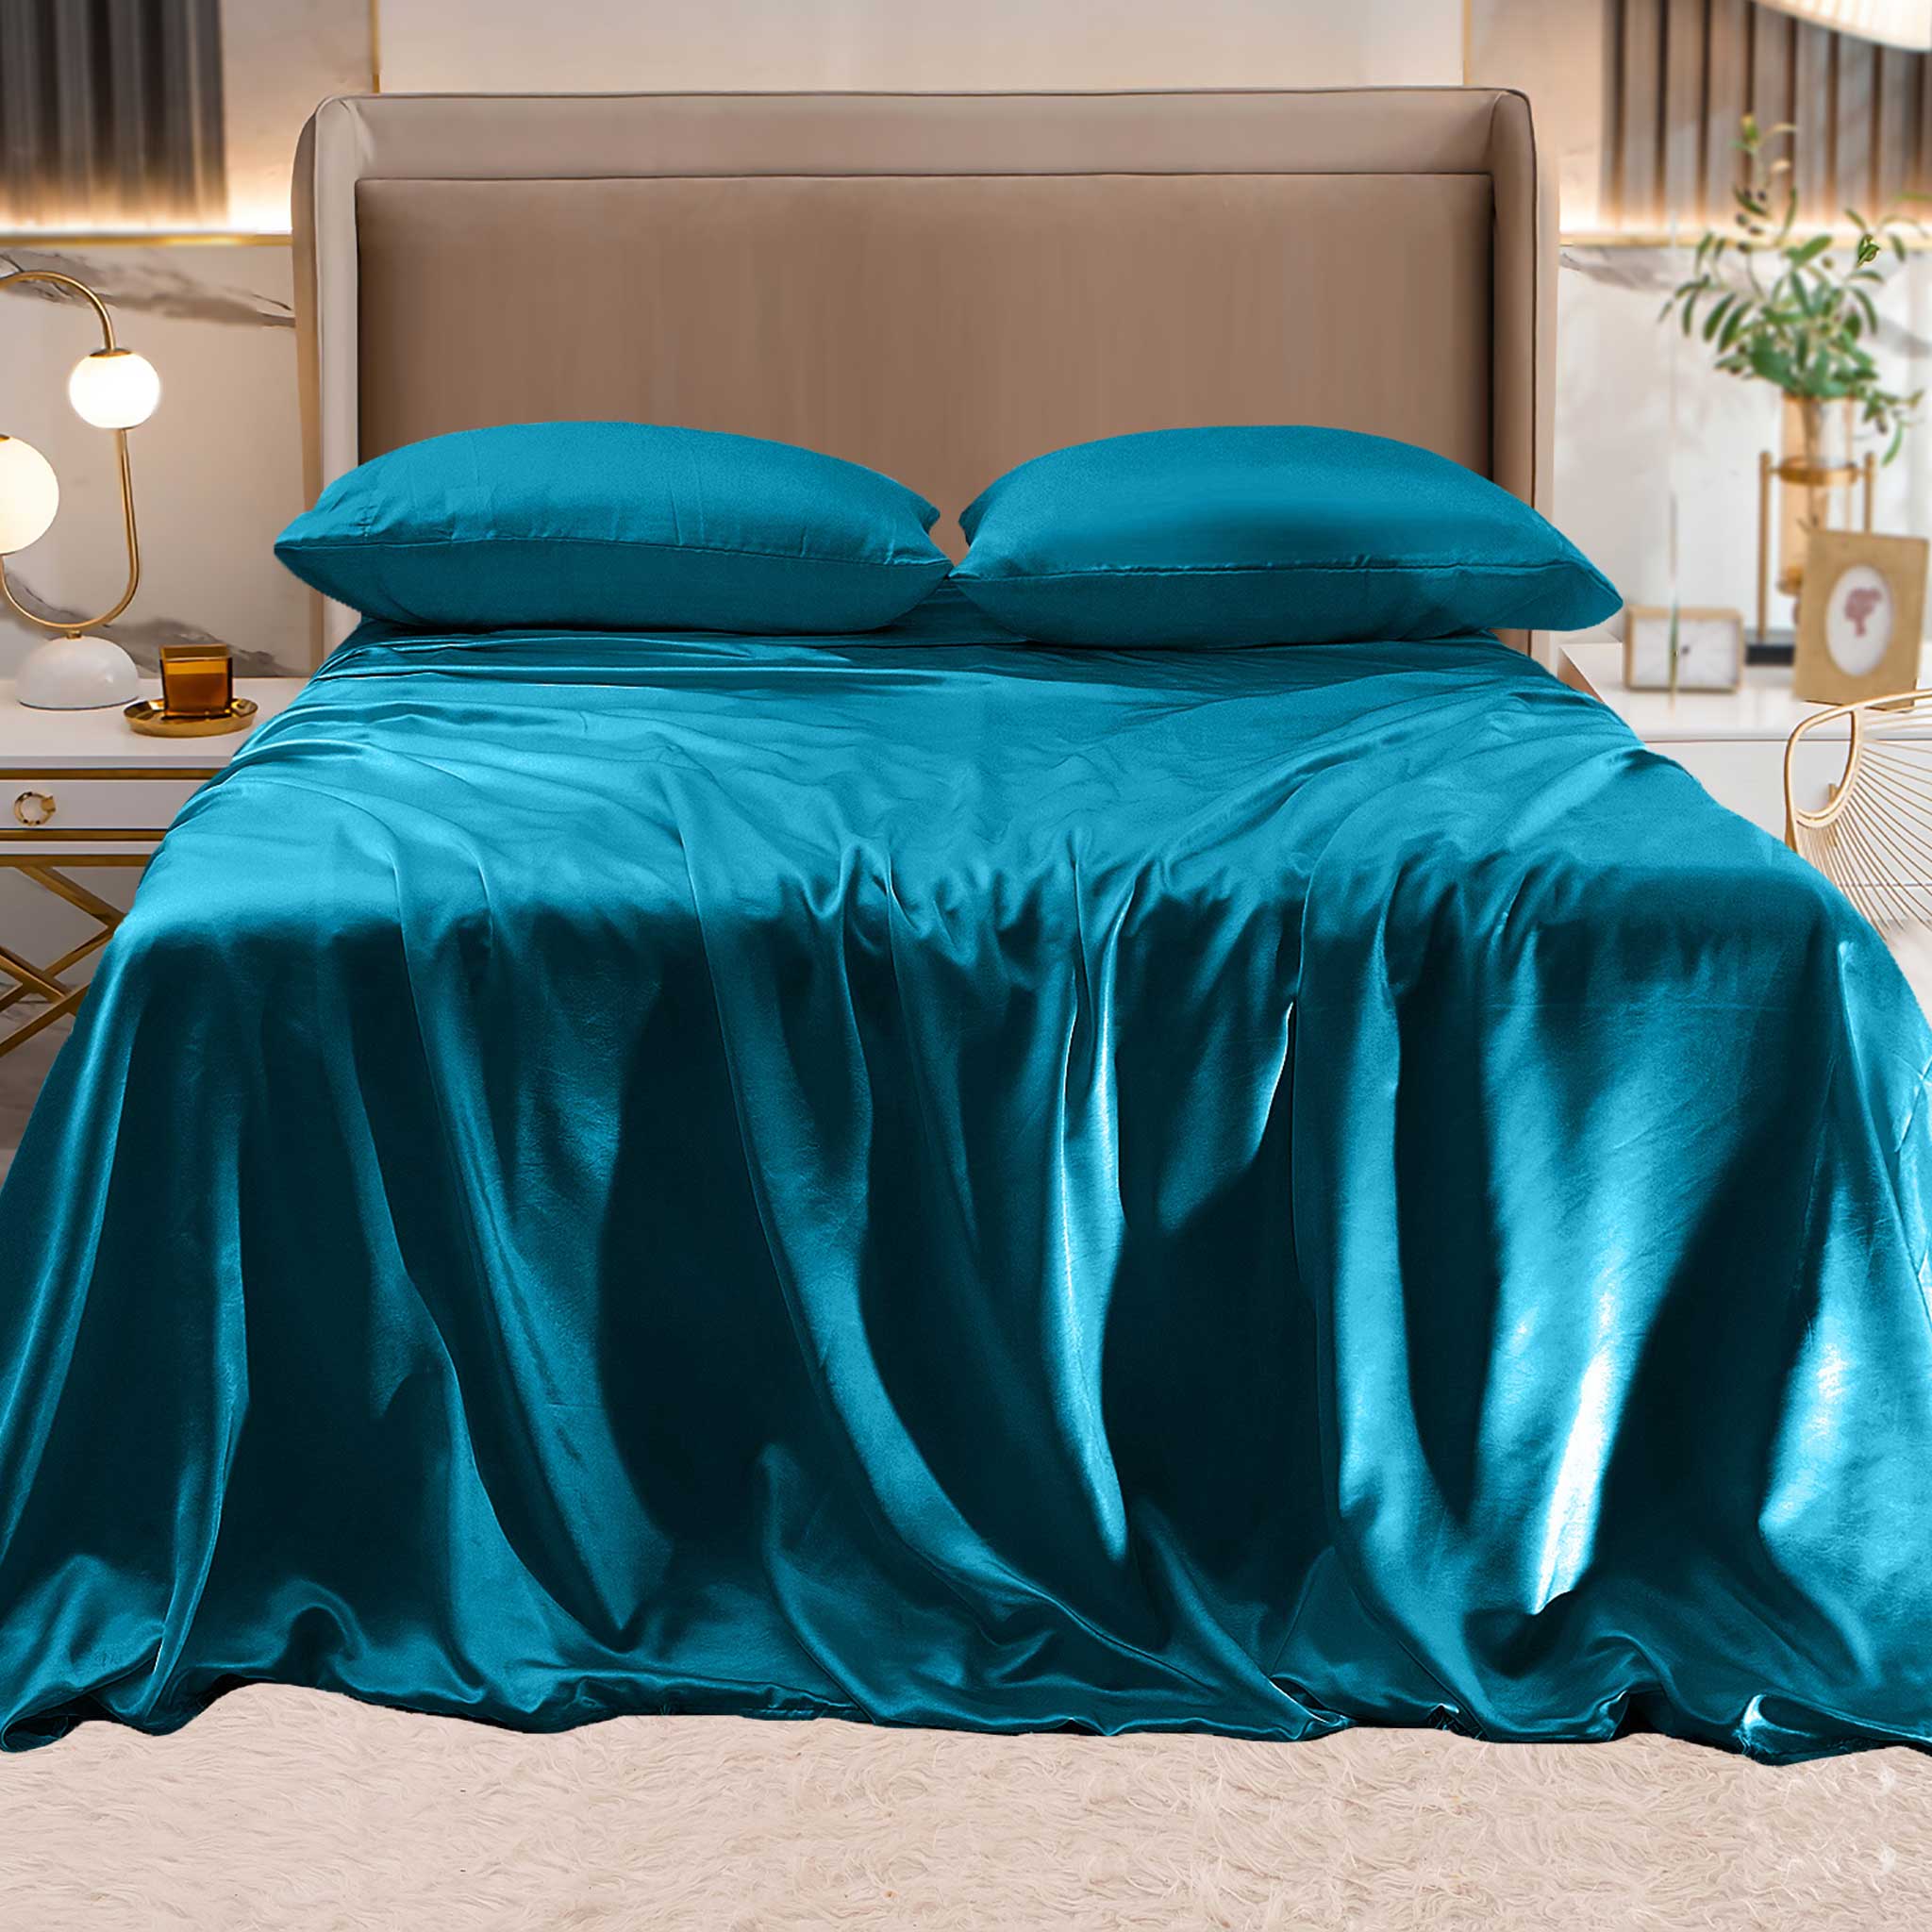 Bed Sheet Set - Silky Satin Luxury And Super Soft Solid Color